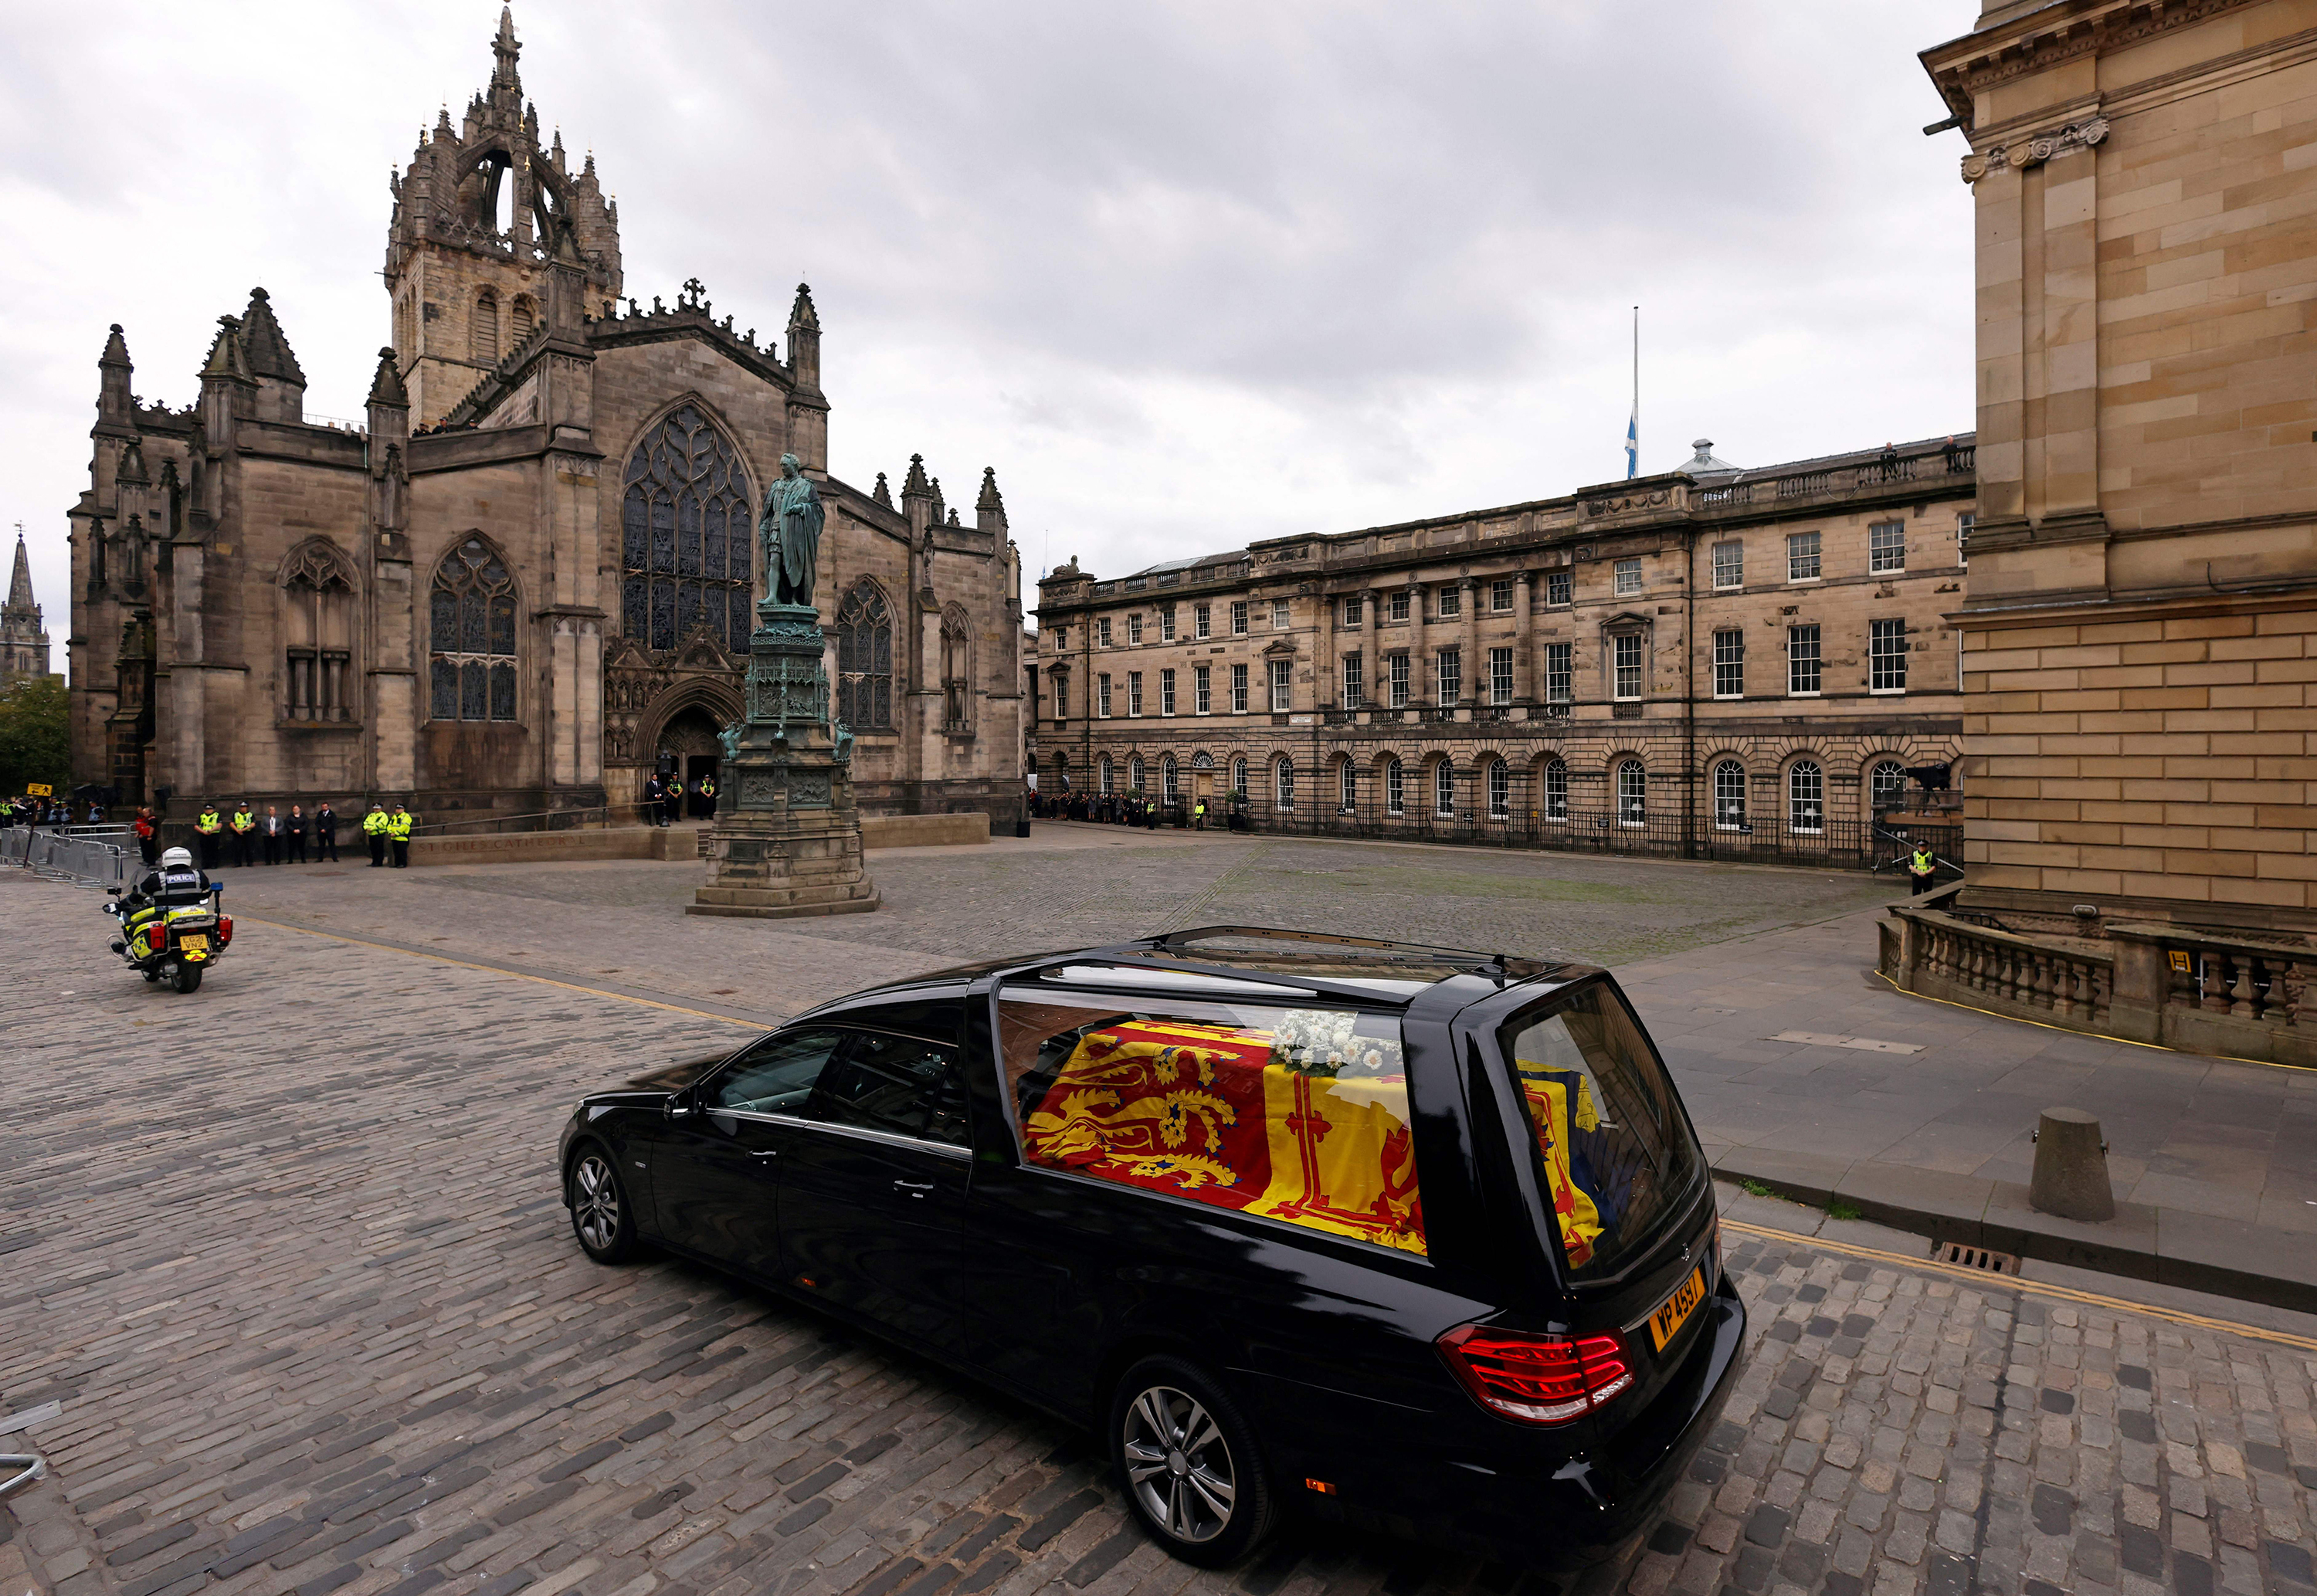 The hearse carrying the coffin of Queen Elizabeth II is driven through Edinburgh toward the Palace of Holyroodhouse on Sunday.